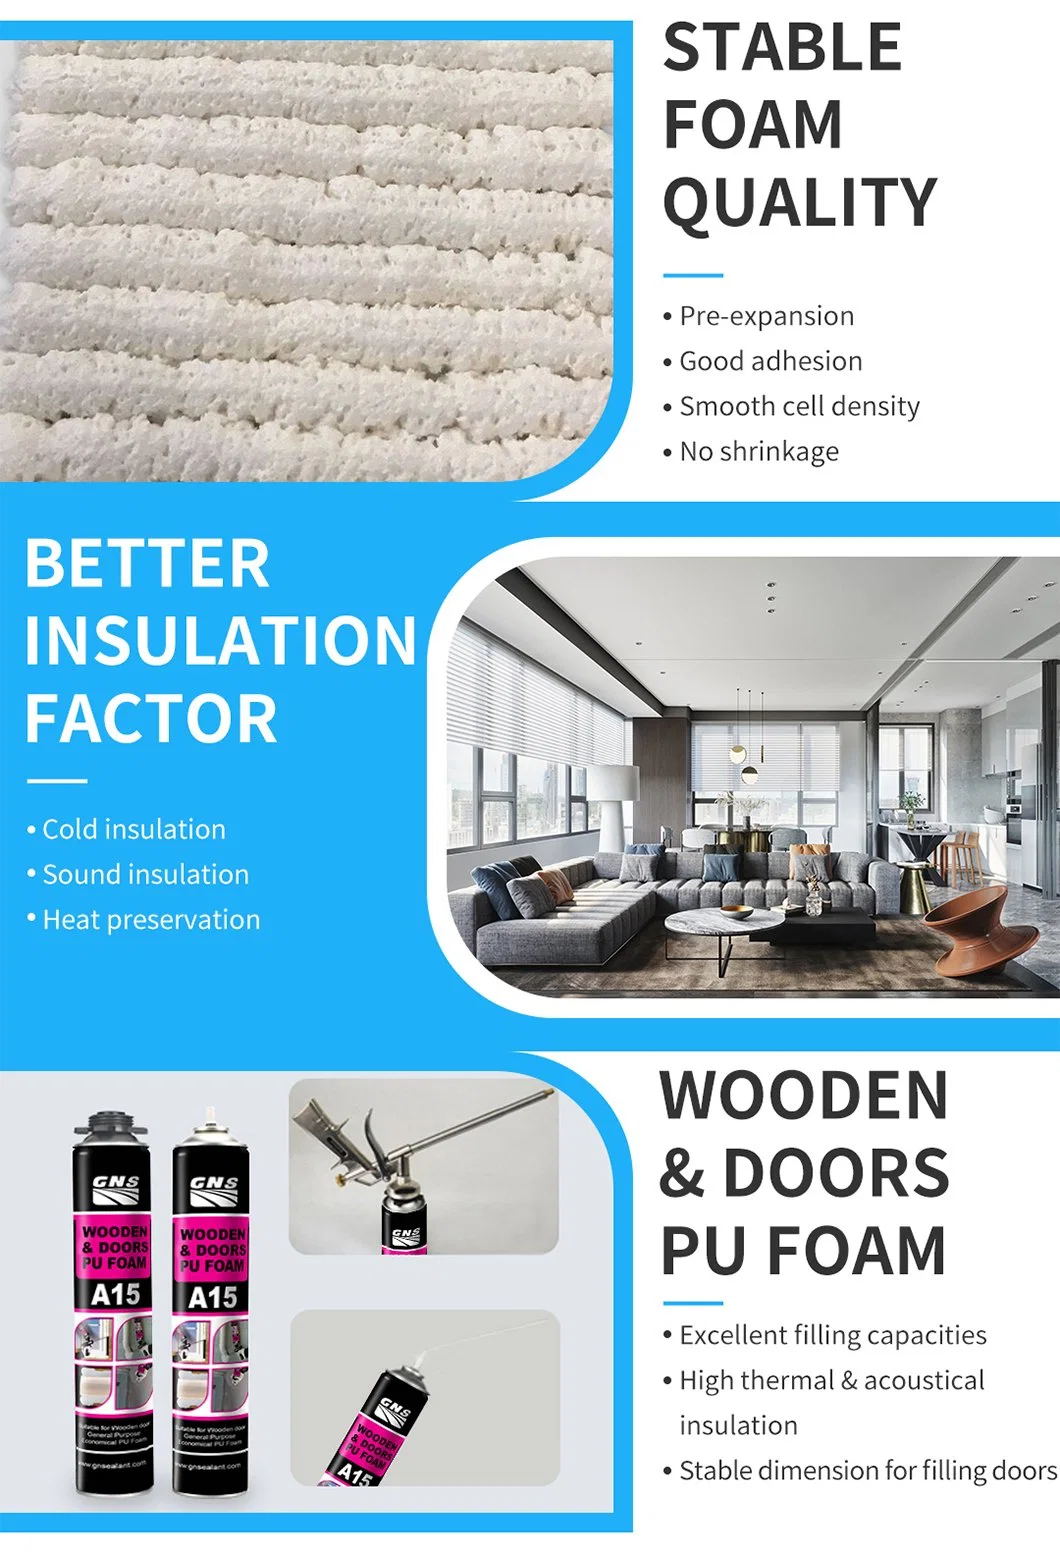 All in One PU Foam up to 45 Liters High Filling Capacity with %180-240 Expansion High Thermal and Acoustic Isolation.